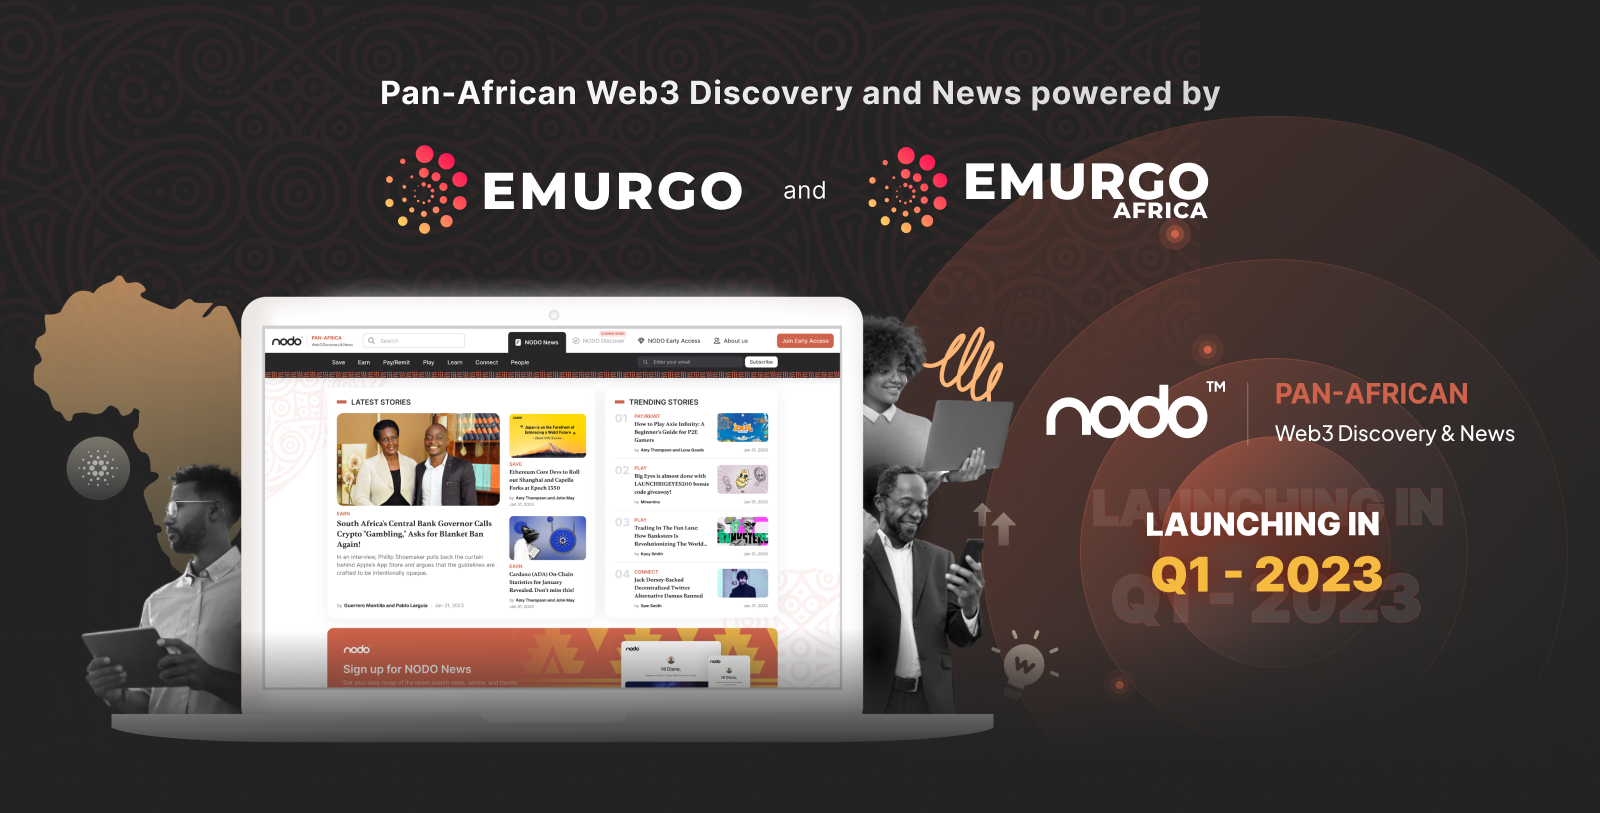 NODO: Pan-African Web3 Discovery and News Service Powered by EMURGO Africa, Launching in Q1 2023